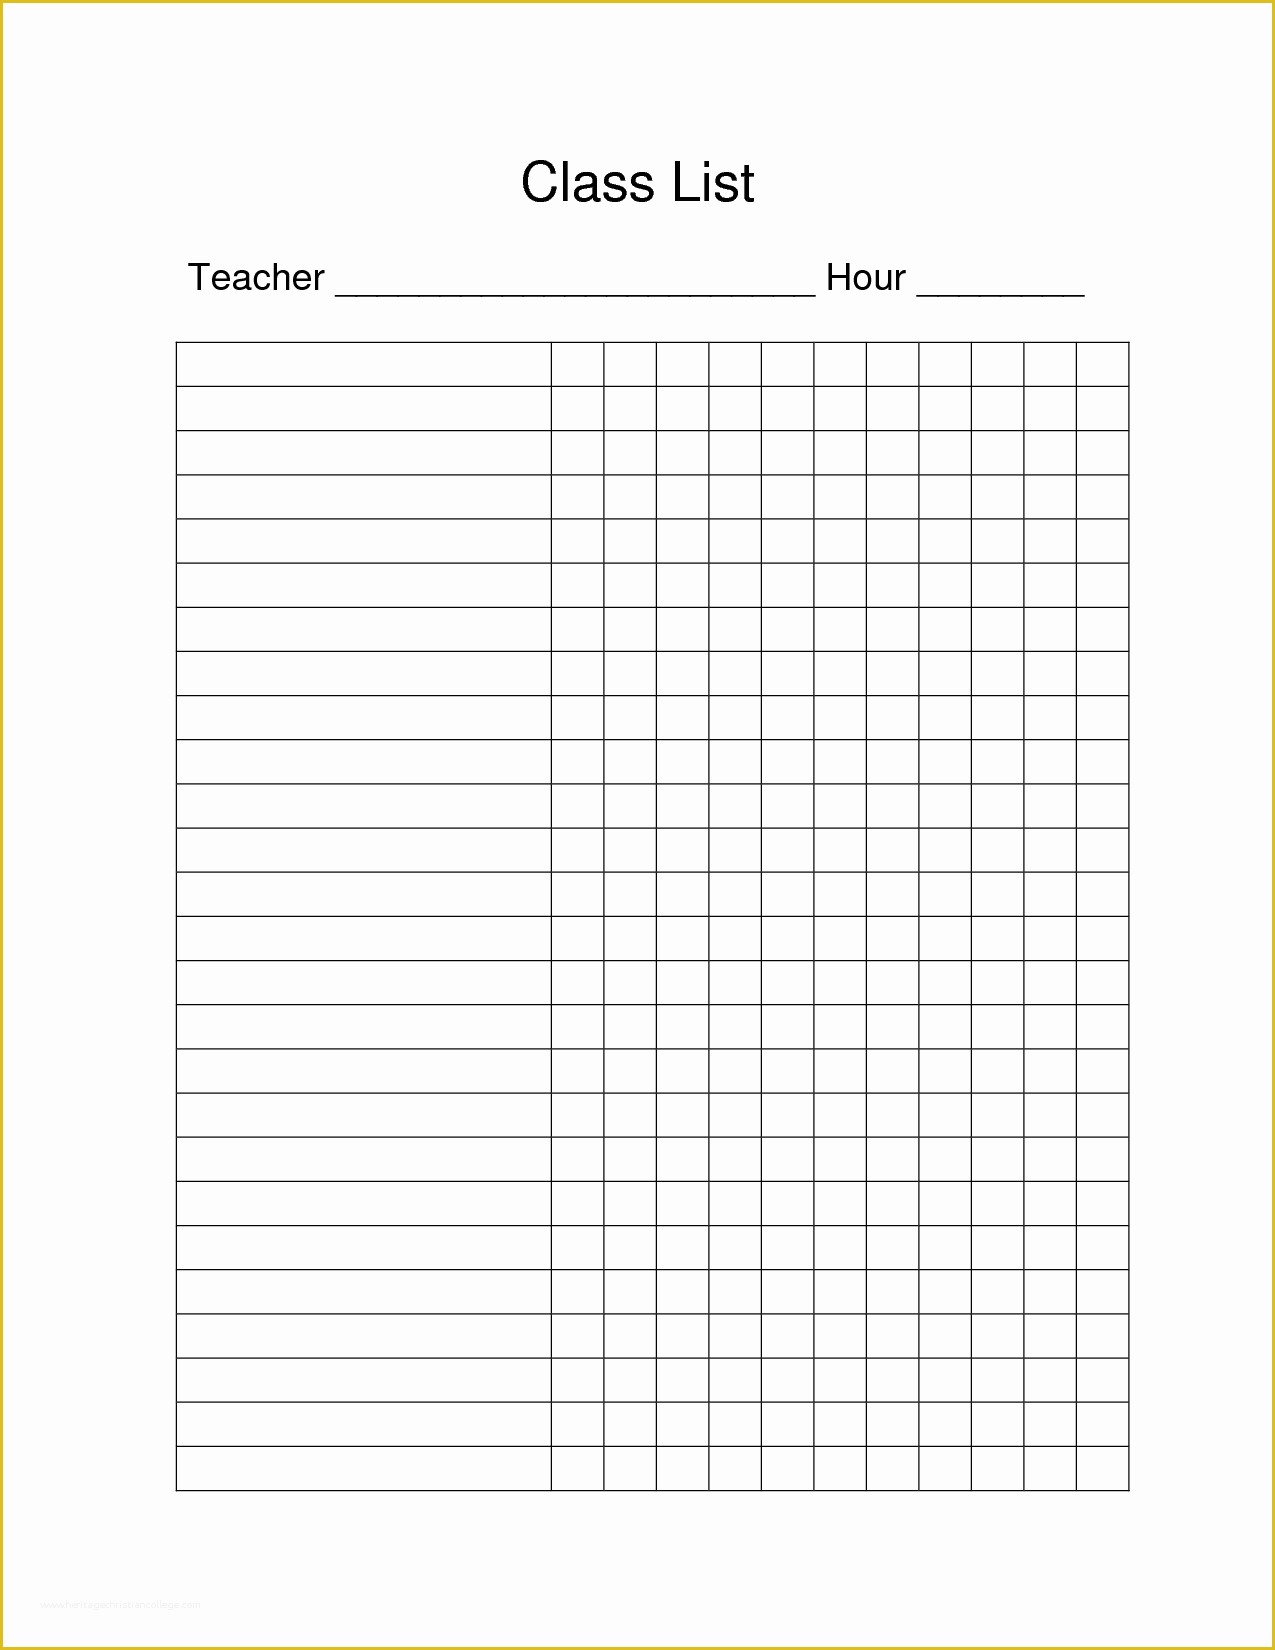 Free Roster Templates Printable Of Free Printable Class List Template for Teachers